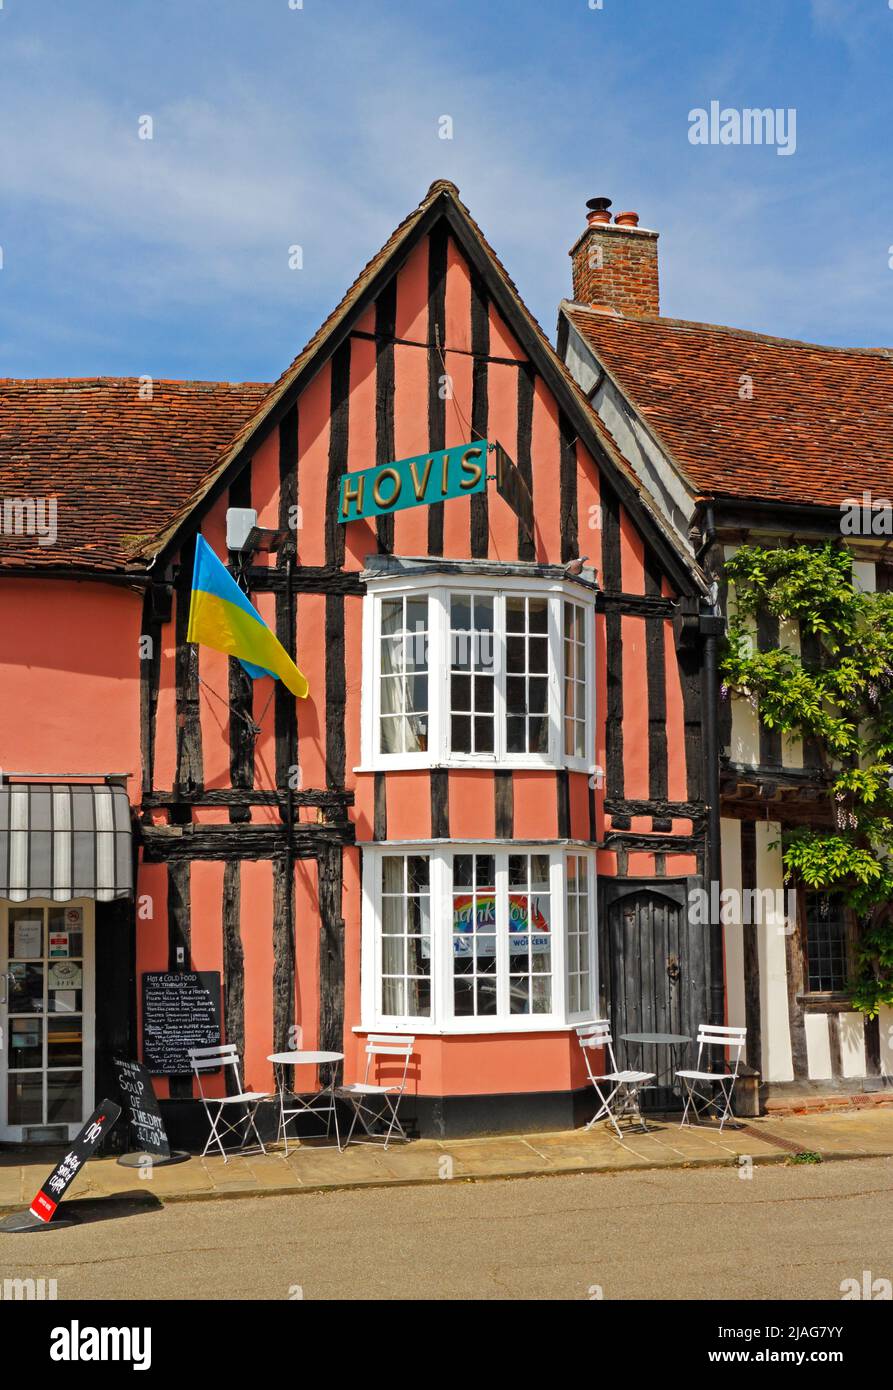 A well preserved half-timbered medieval property in the High Street in the centre of Lavenham, Suffolk, England, United Kingdom. Stock Photo